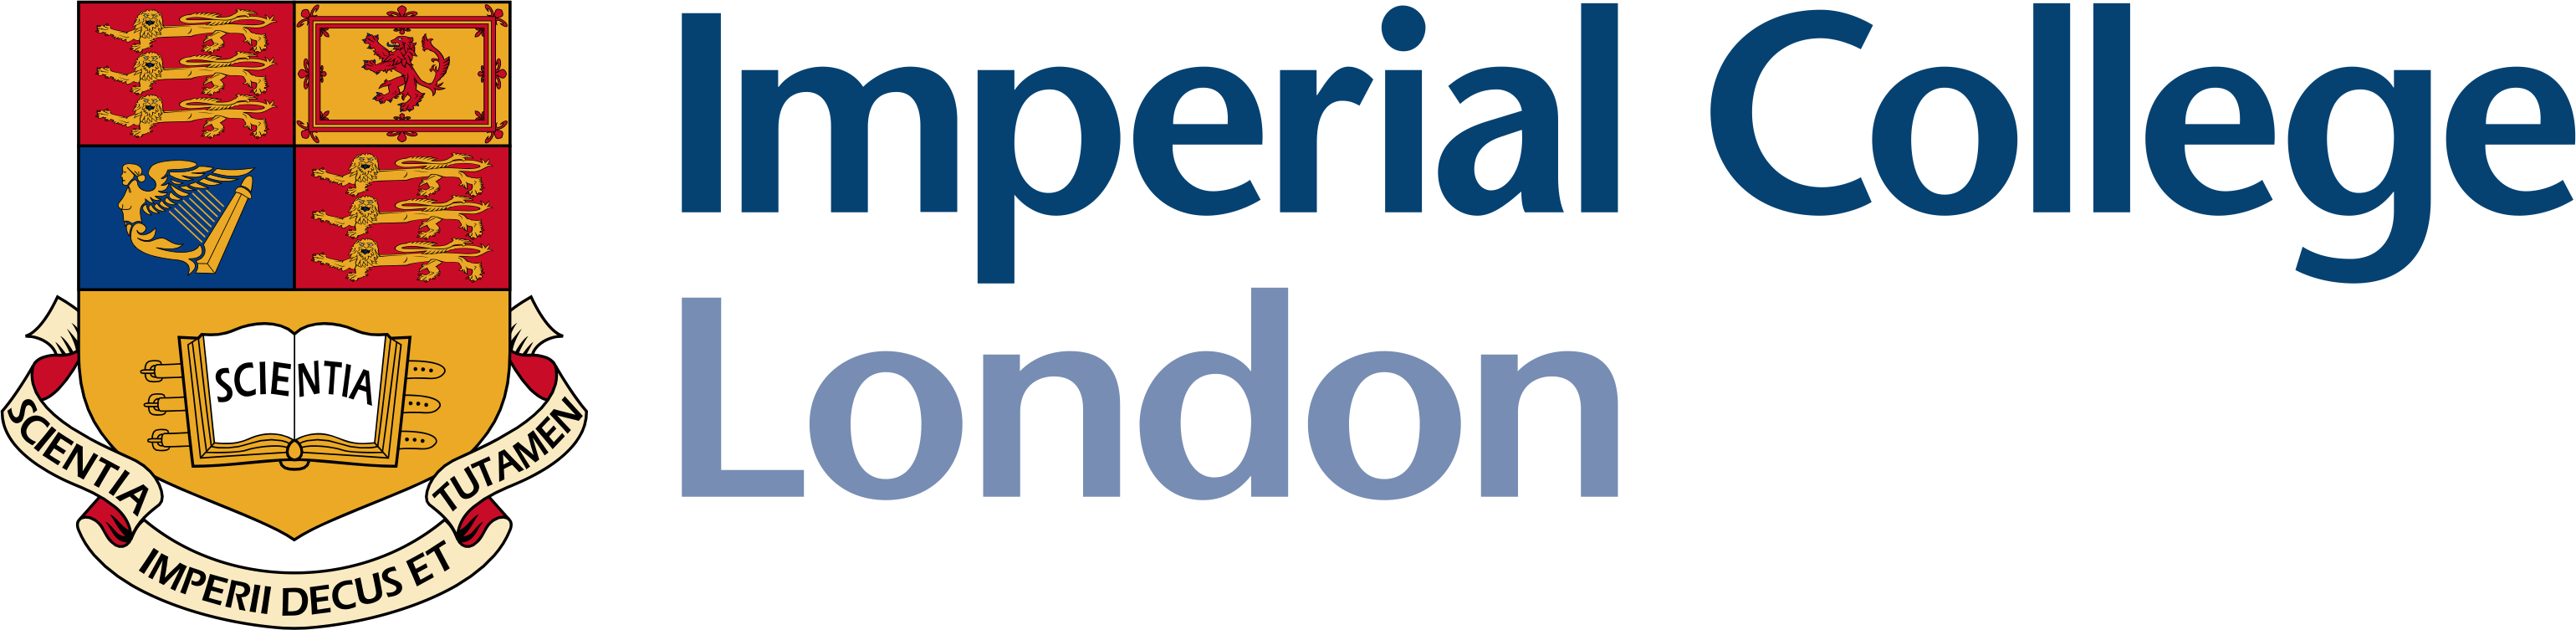 Imperial-College-London2.png